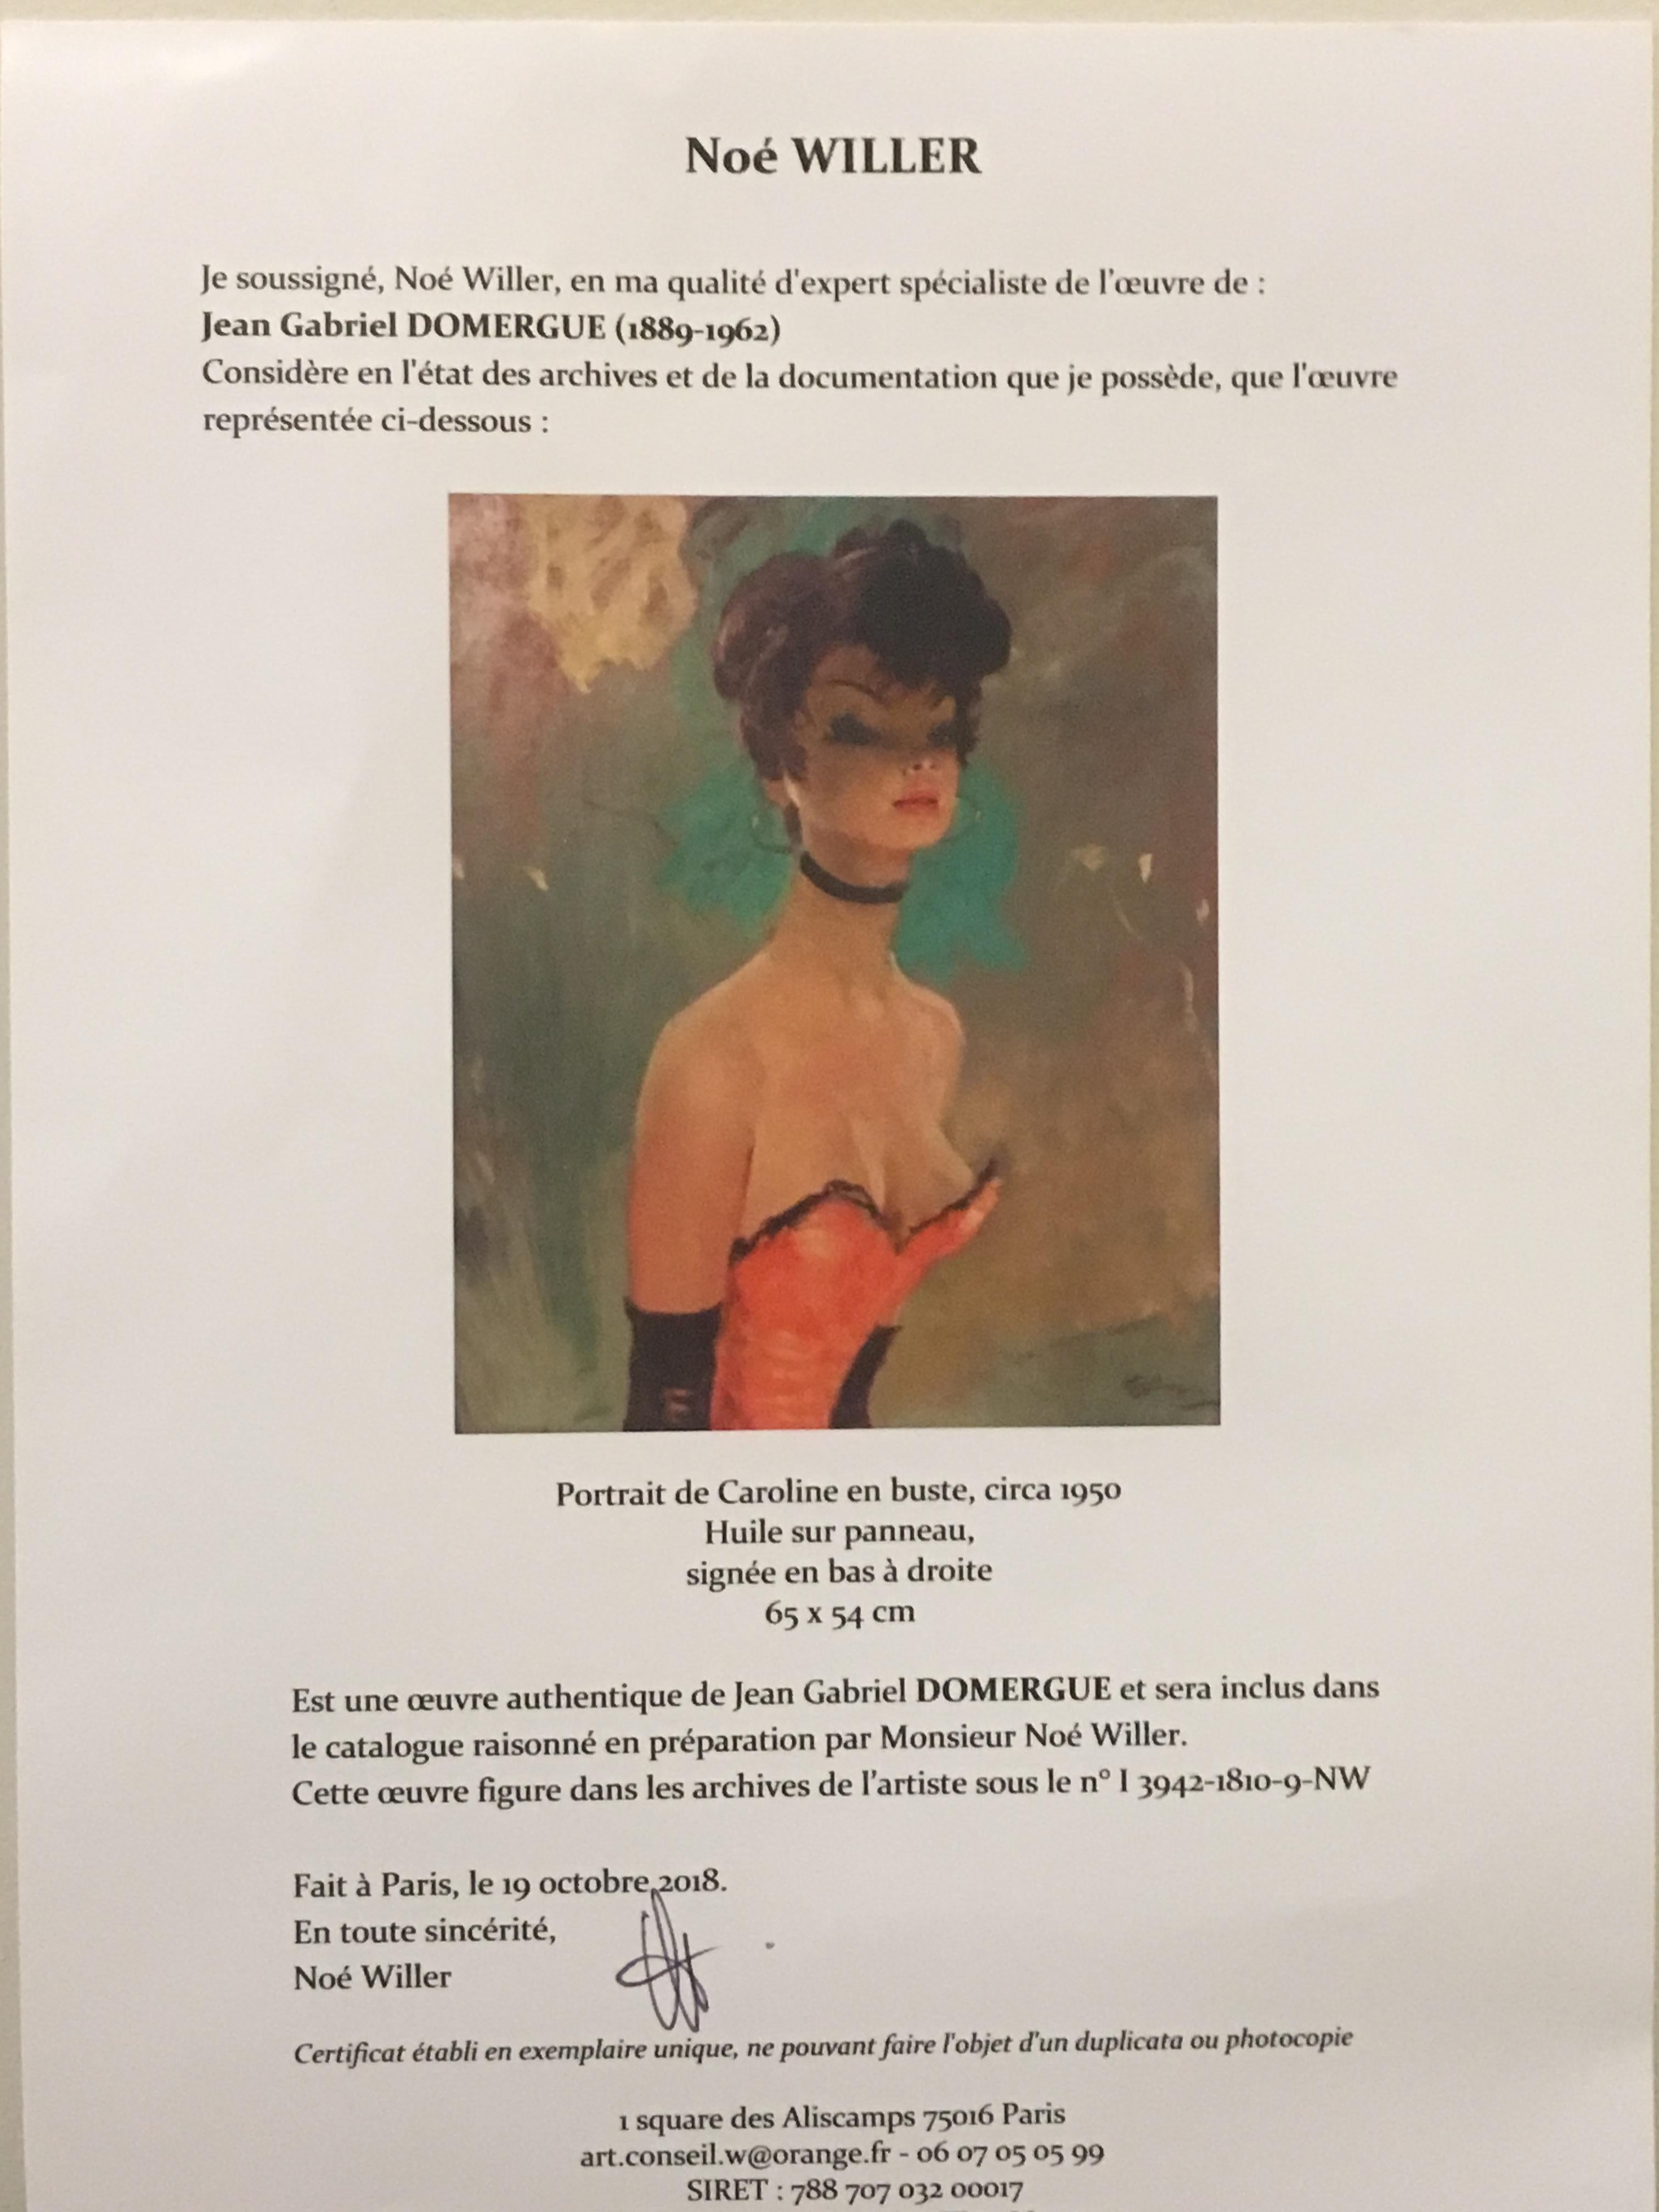 Canvas Stunning Portrait by J-G Domergue, France, with Noé Willer Certificate